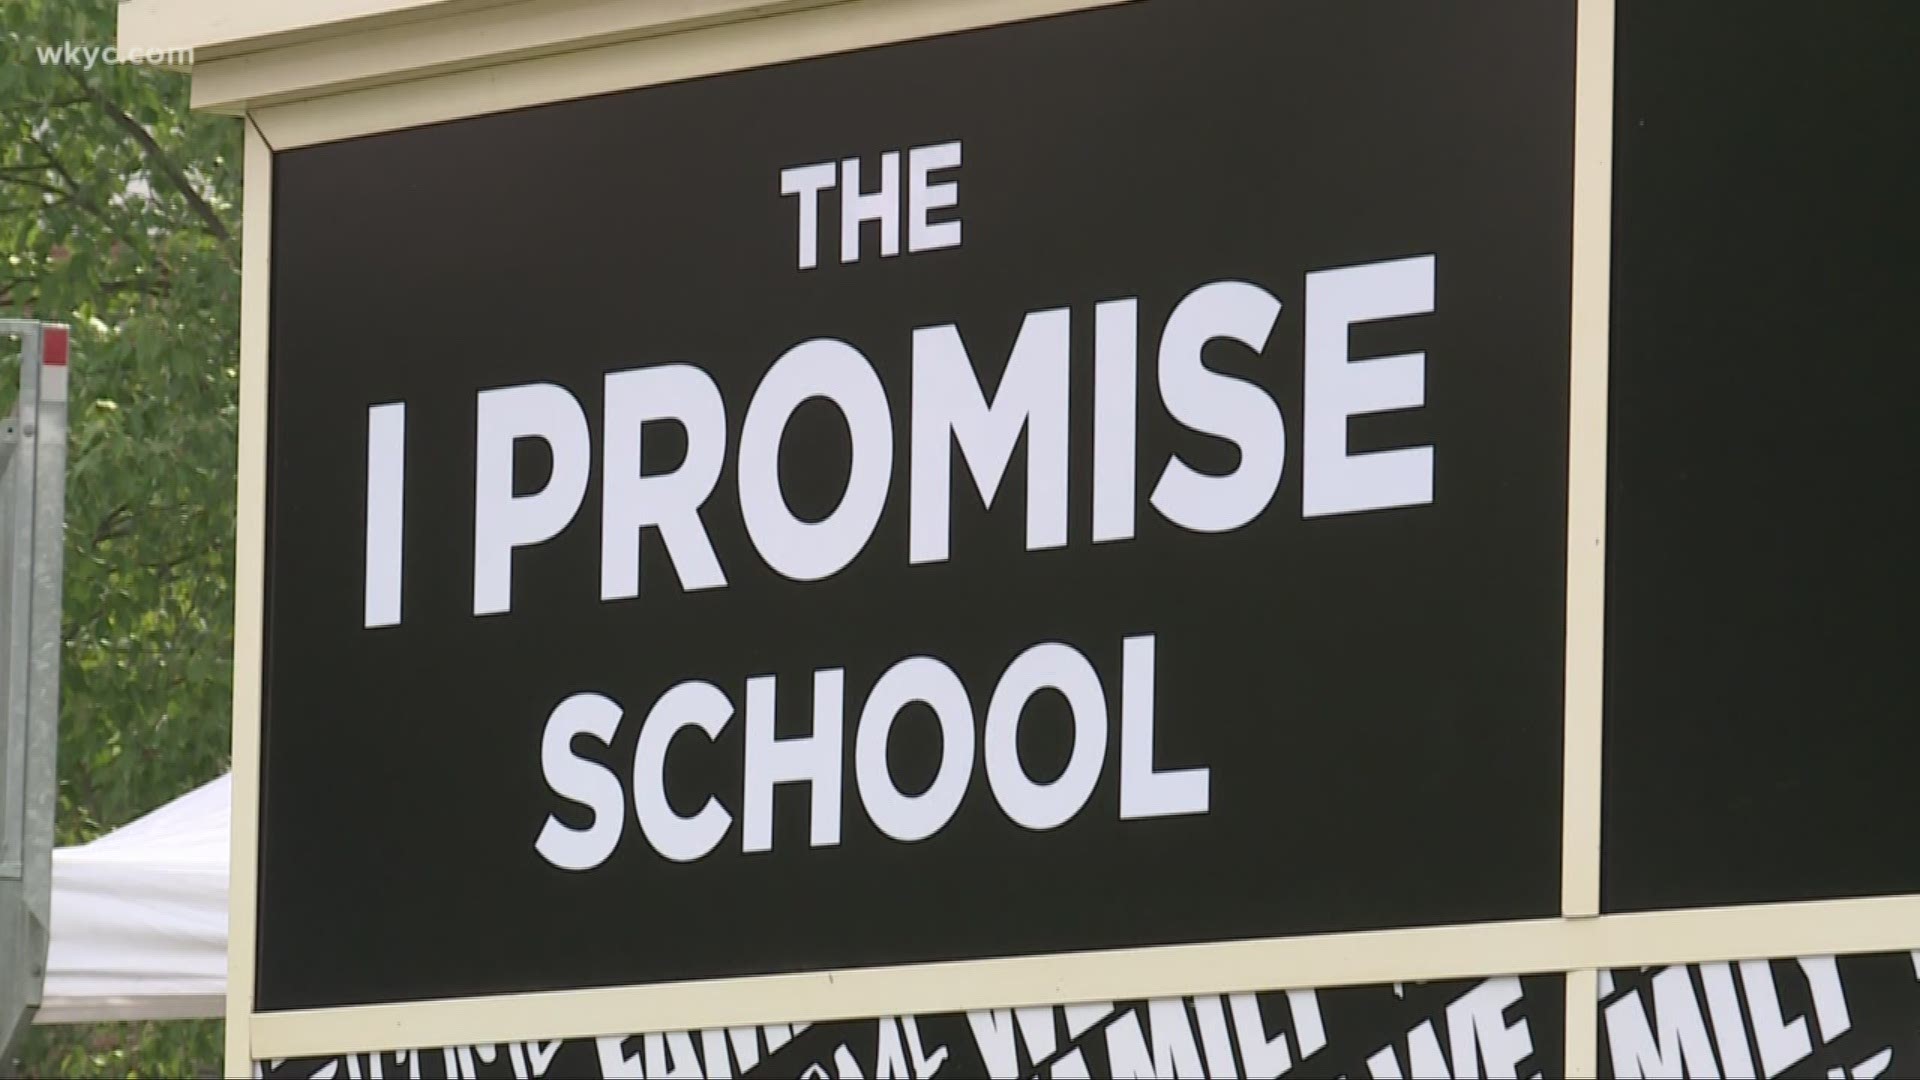 July 30, 2018: The big day has finally arrived. LeBron James is opening his 'I PROMISE' school in Akron. WKYC's Austin Love has a preview.